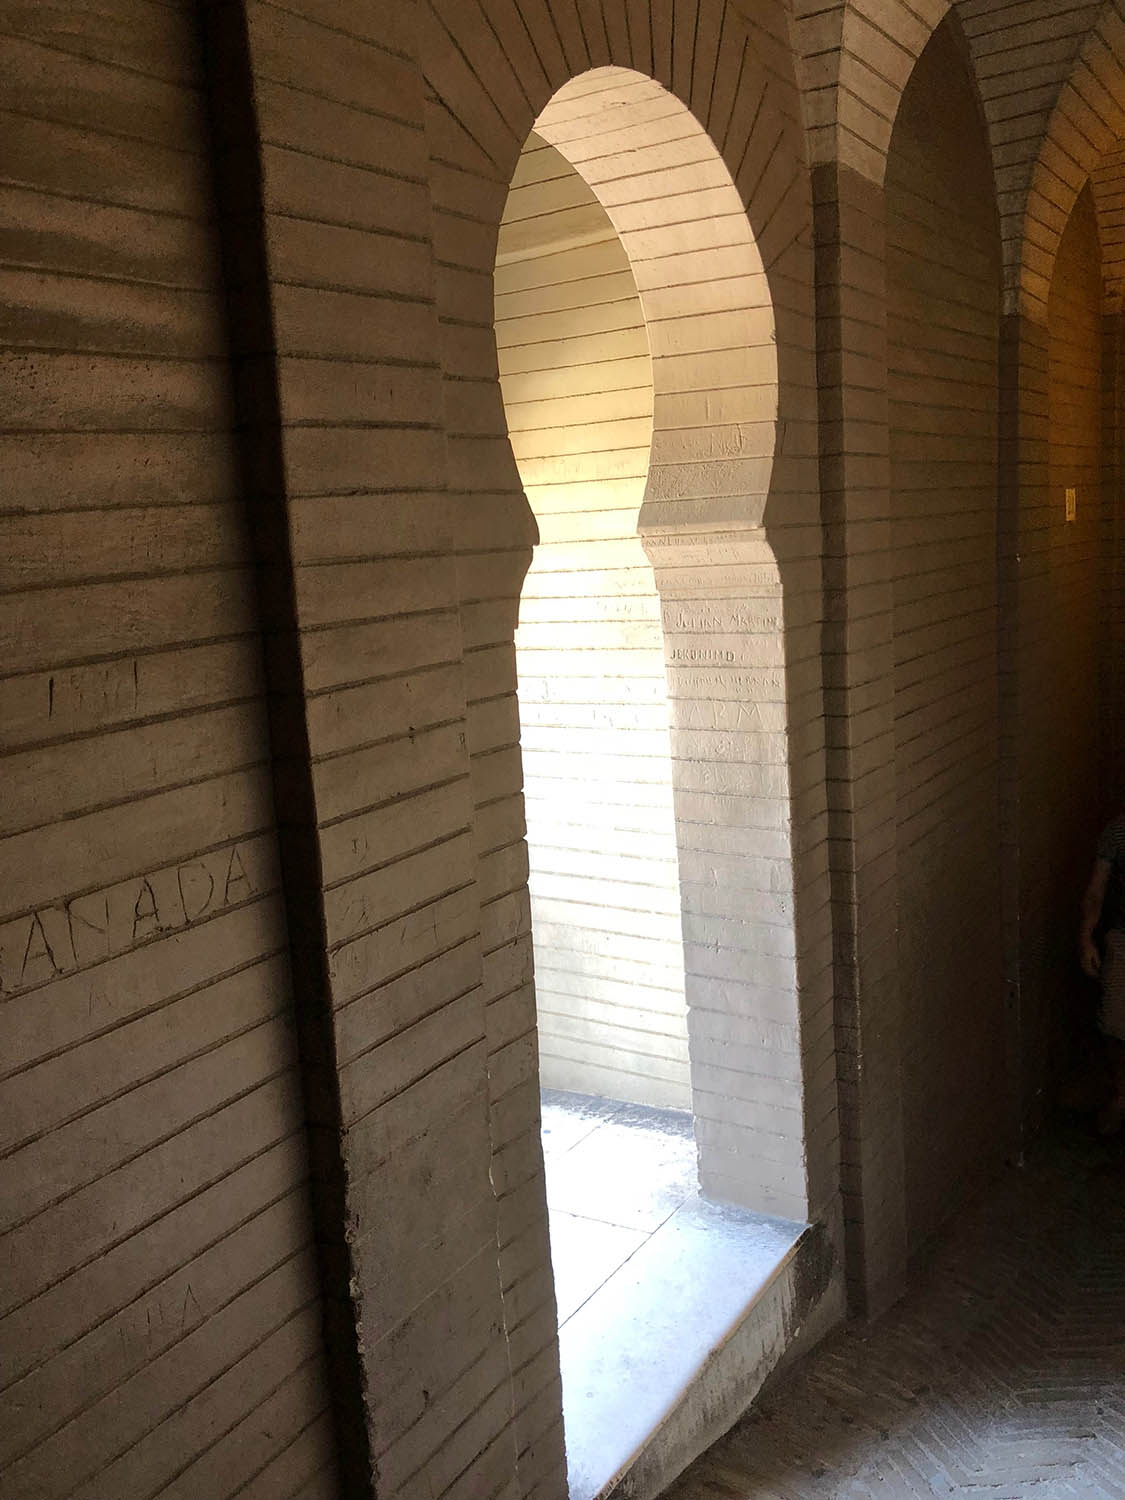 View of rounded horseshoe arch window from La Giralda's interior stairs.